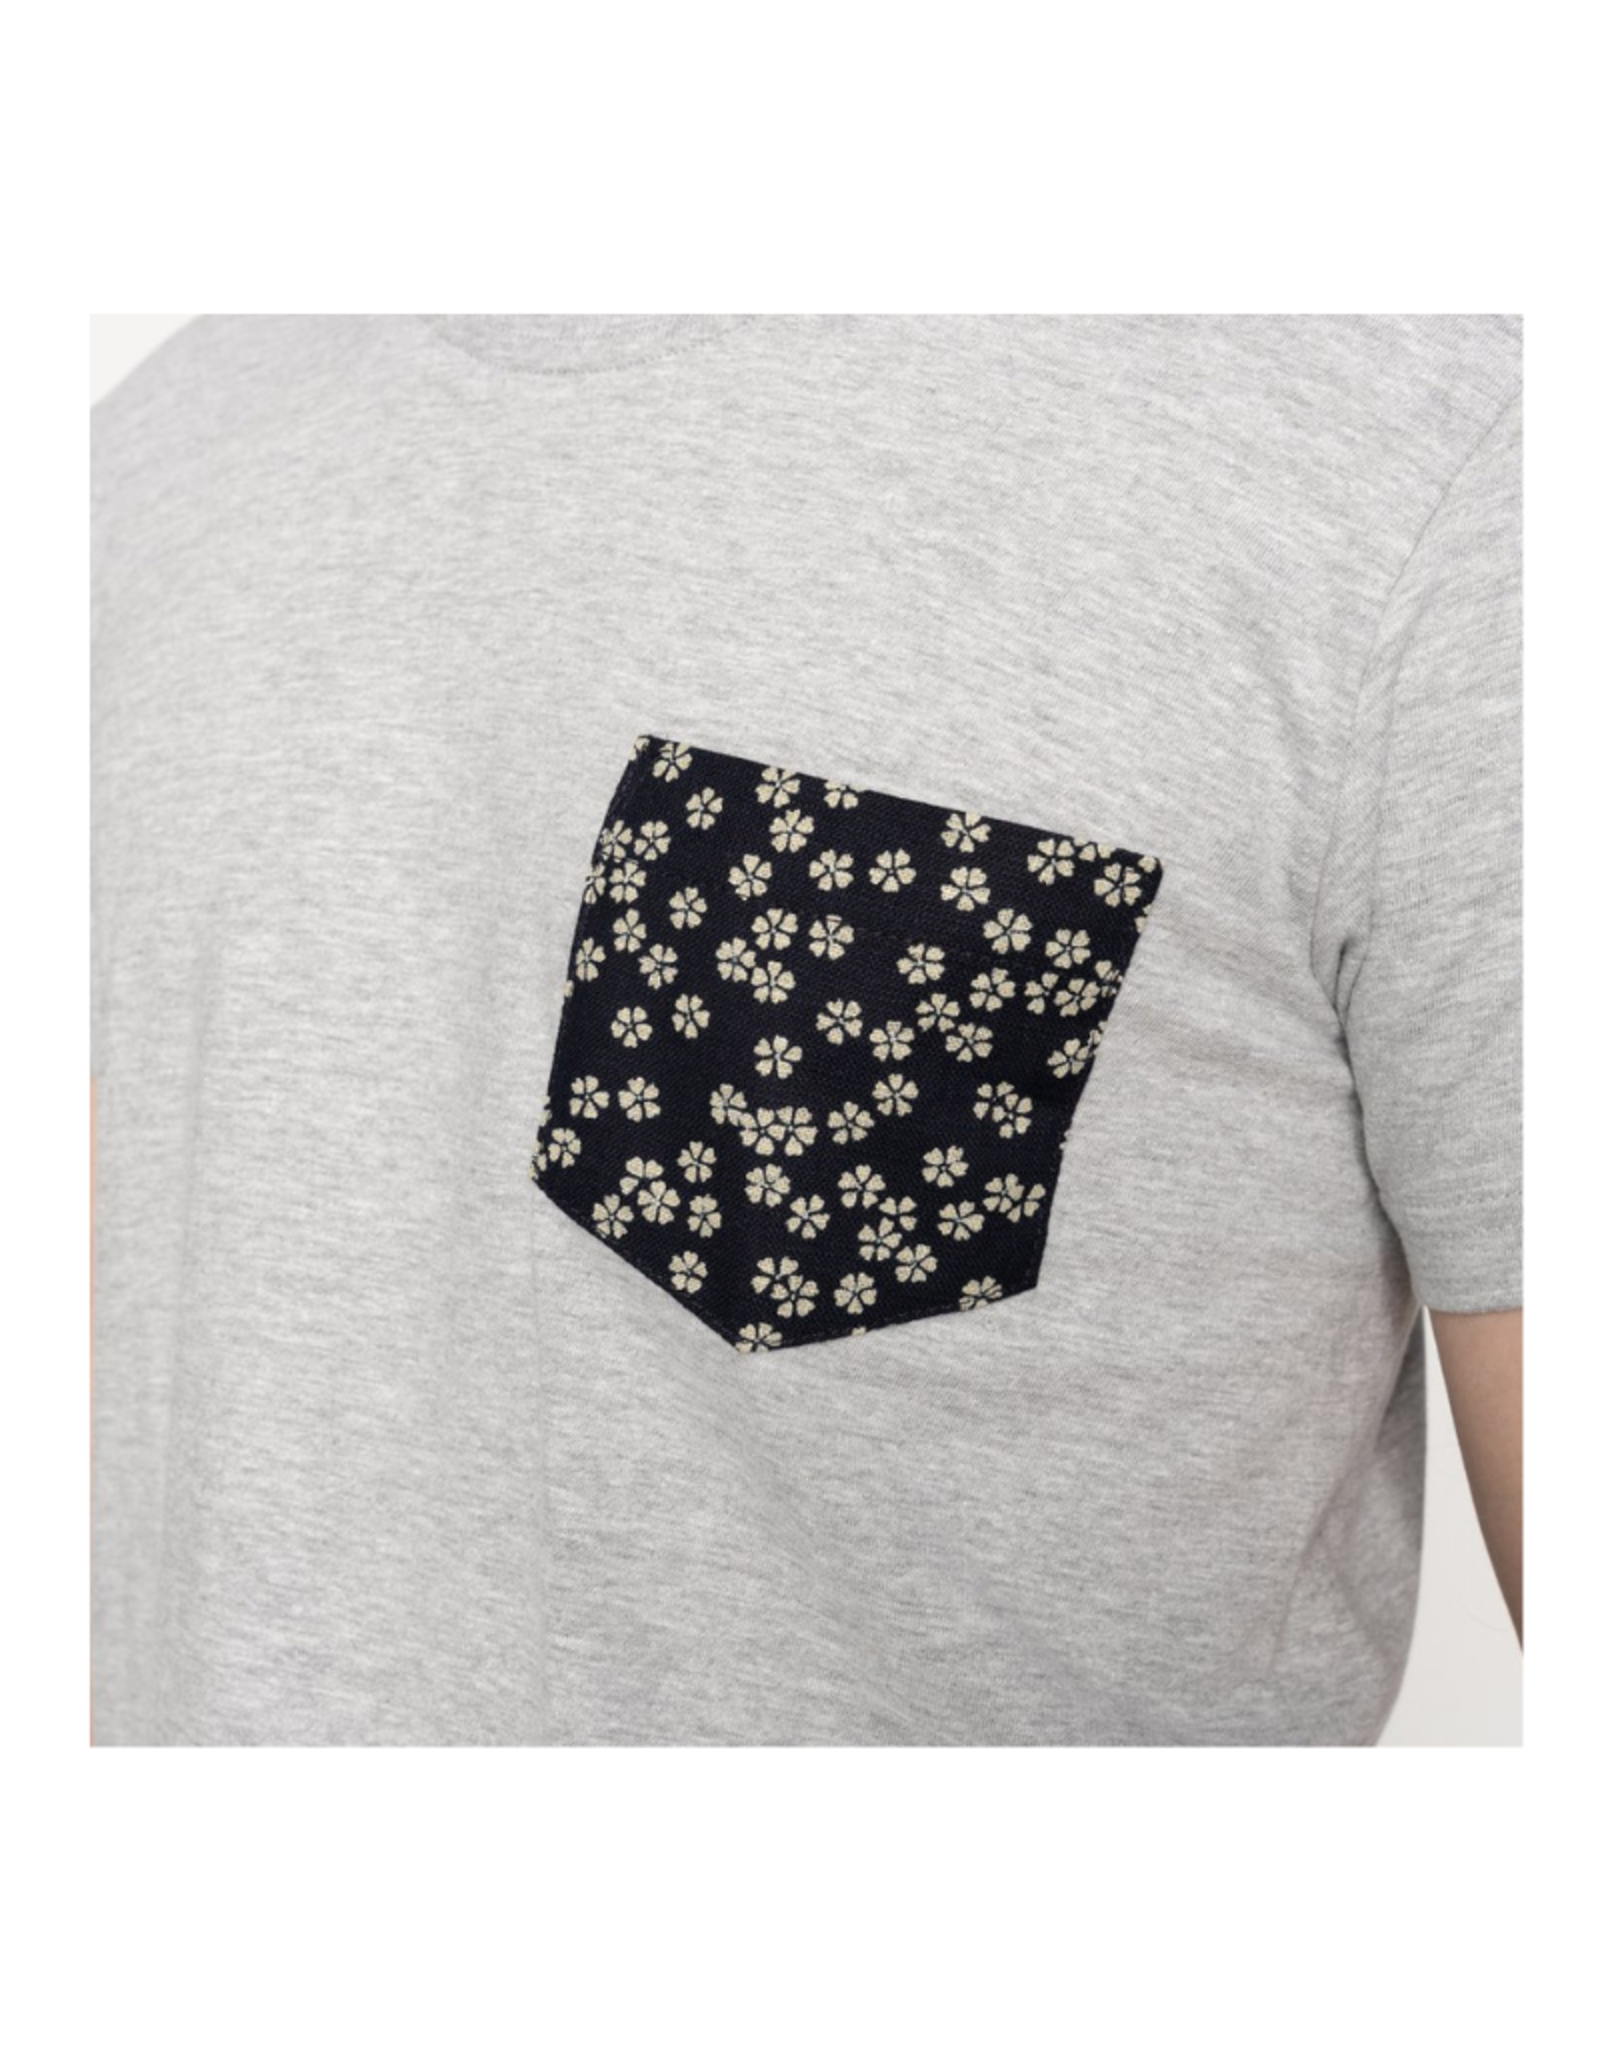 Naked and Famous Pocket Tee Heather grey PE24 Naked and famous Kimono flowers